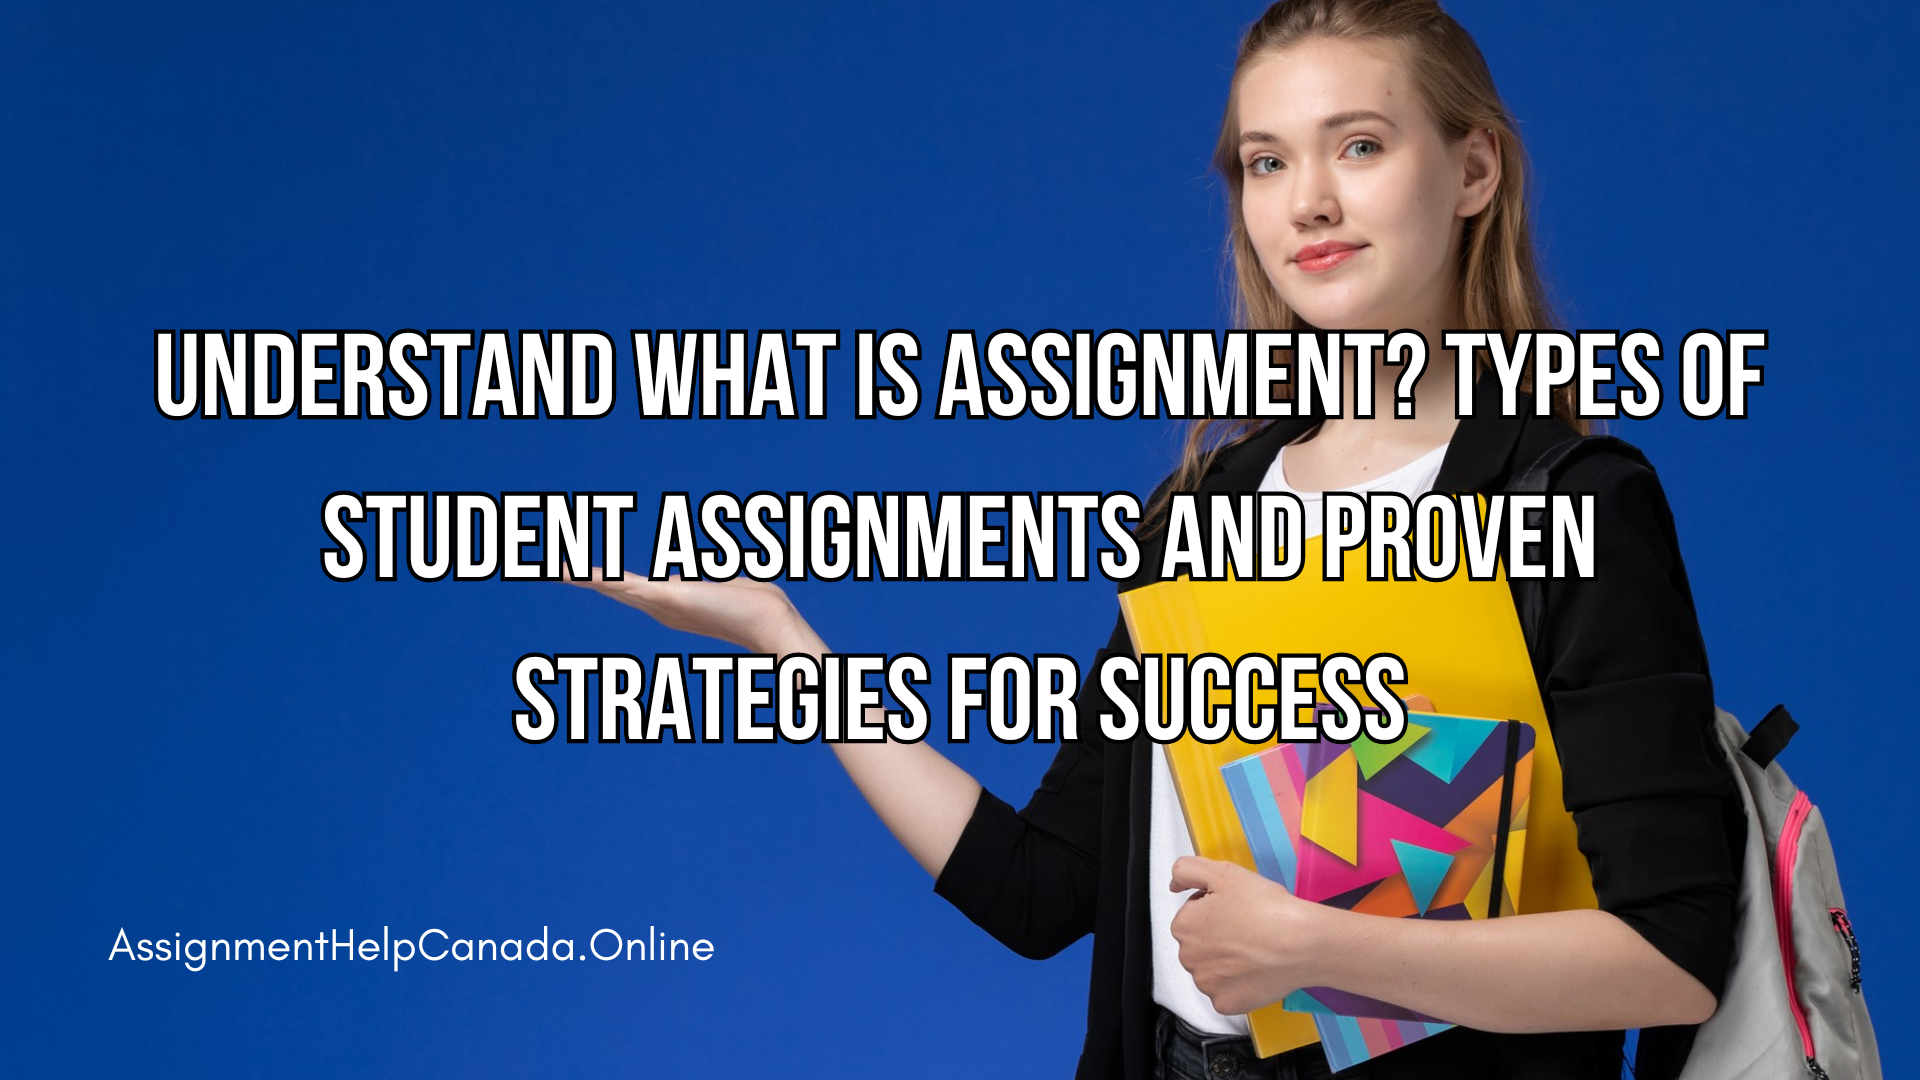 Understand what is Assignment? Types of Student Assignments and Proven Strategies for Success